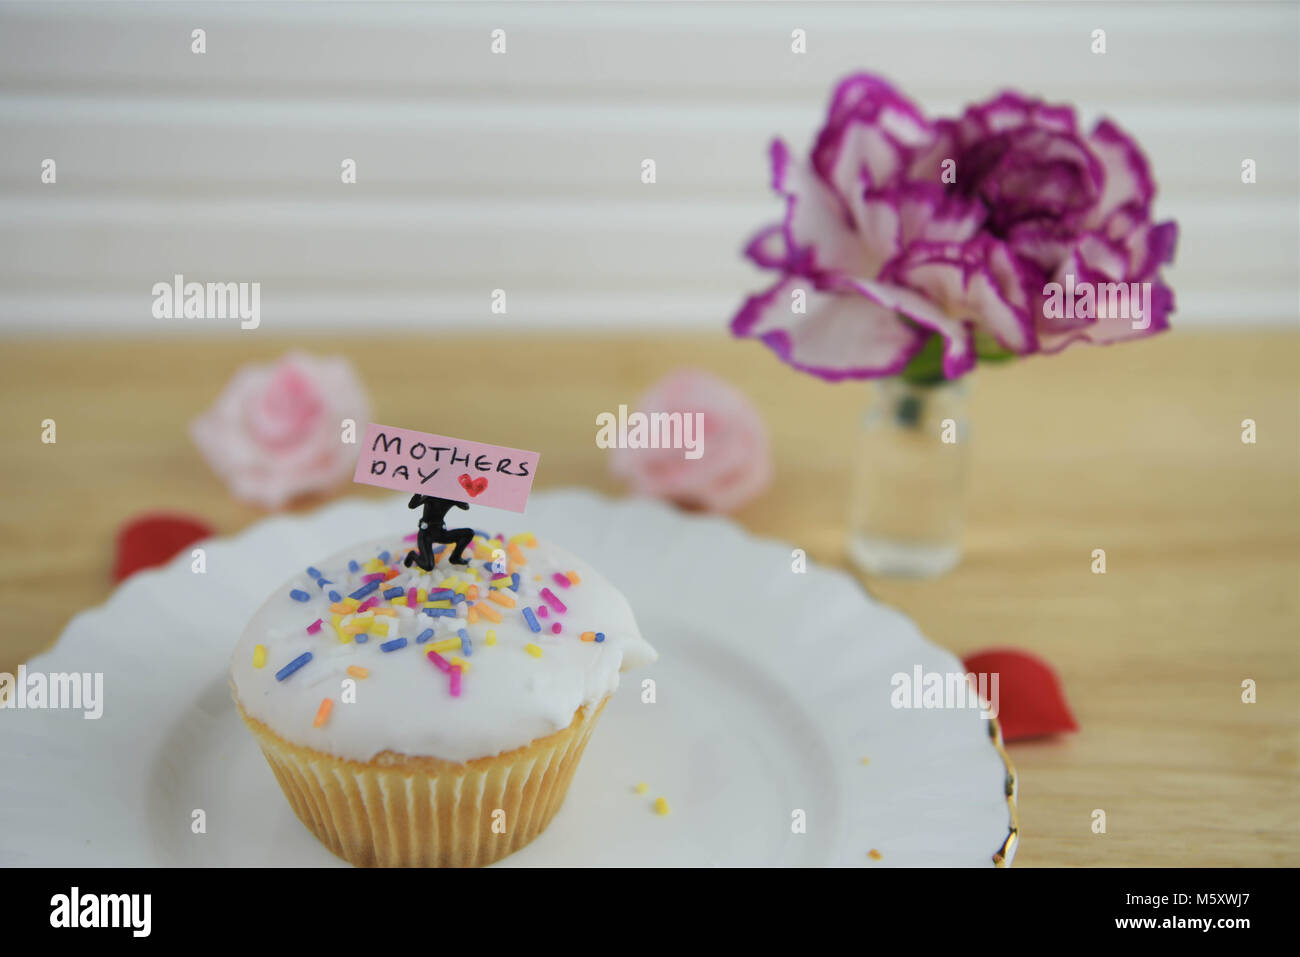 mothers day words with homemade mini cake and fresh flowers Stock Photo